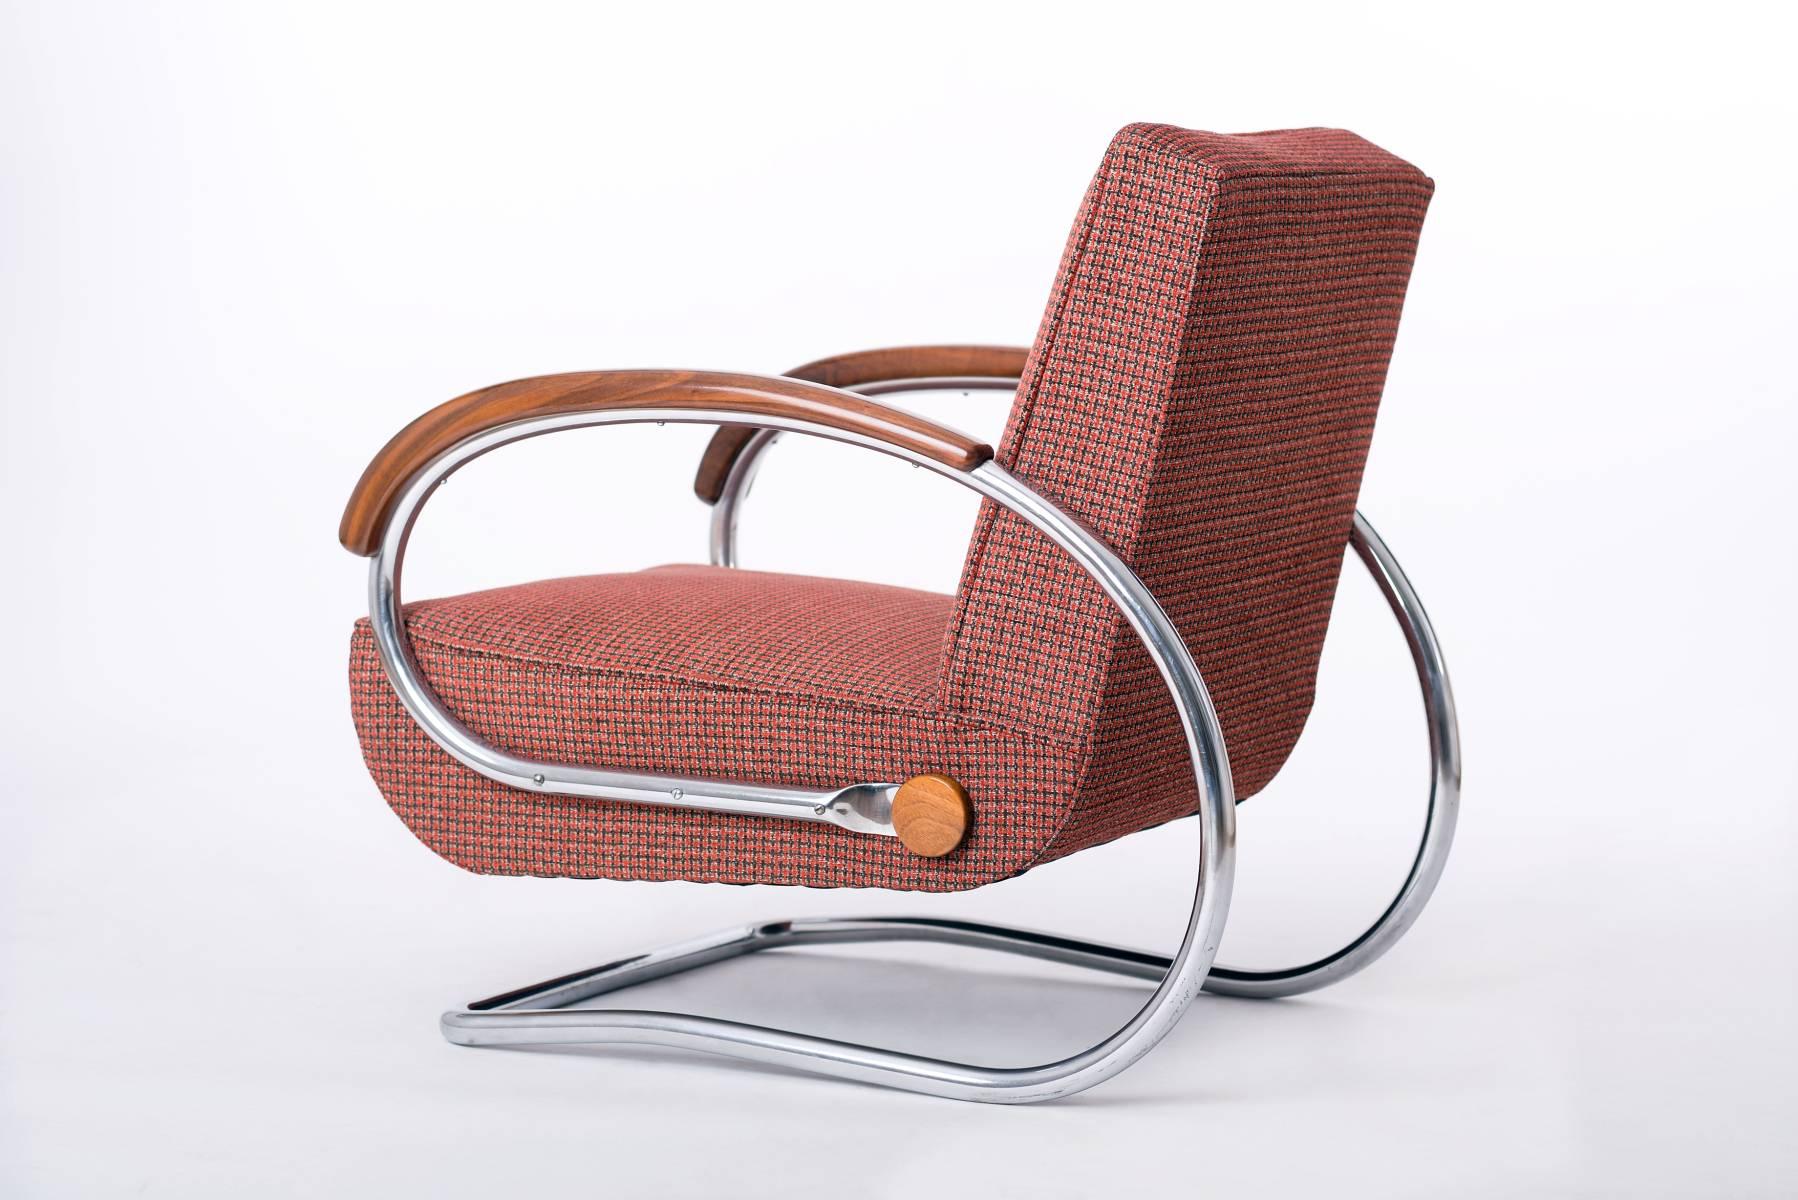 This cantilever chair H-221 with a chromed tubular steel frame was designed by Czech designer Jindrich Halabala for UP Zavody. This early chair was manufactured in the 1930s. It features the original upholstery. The seat surface has been